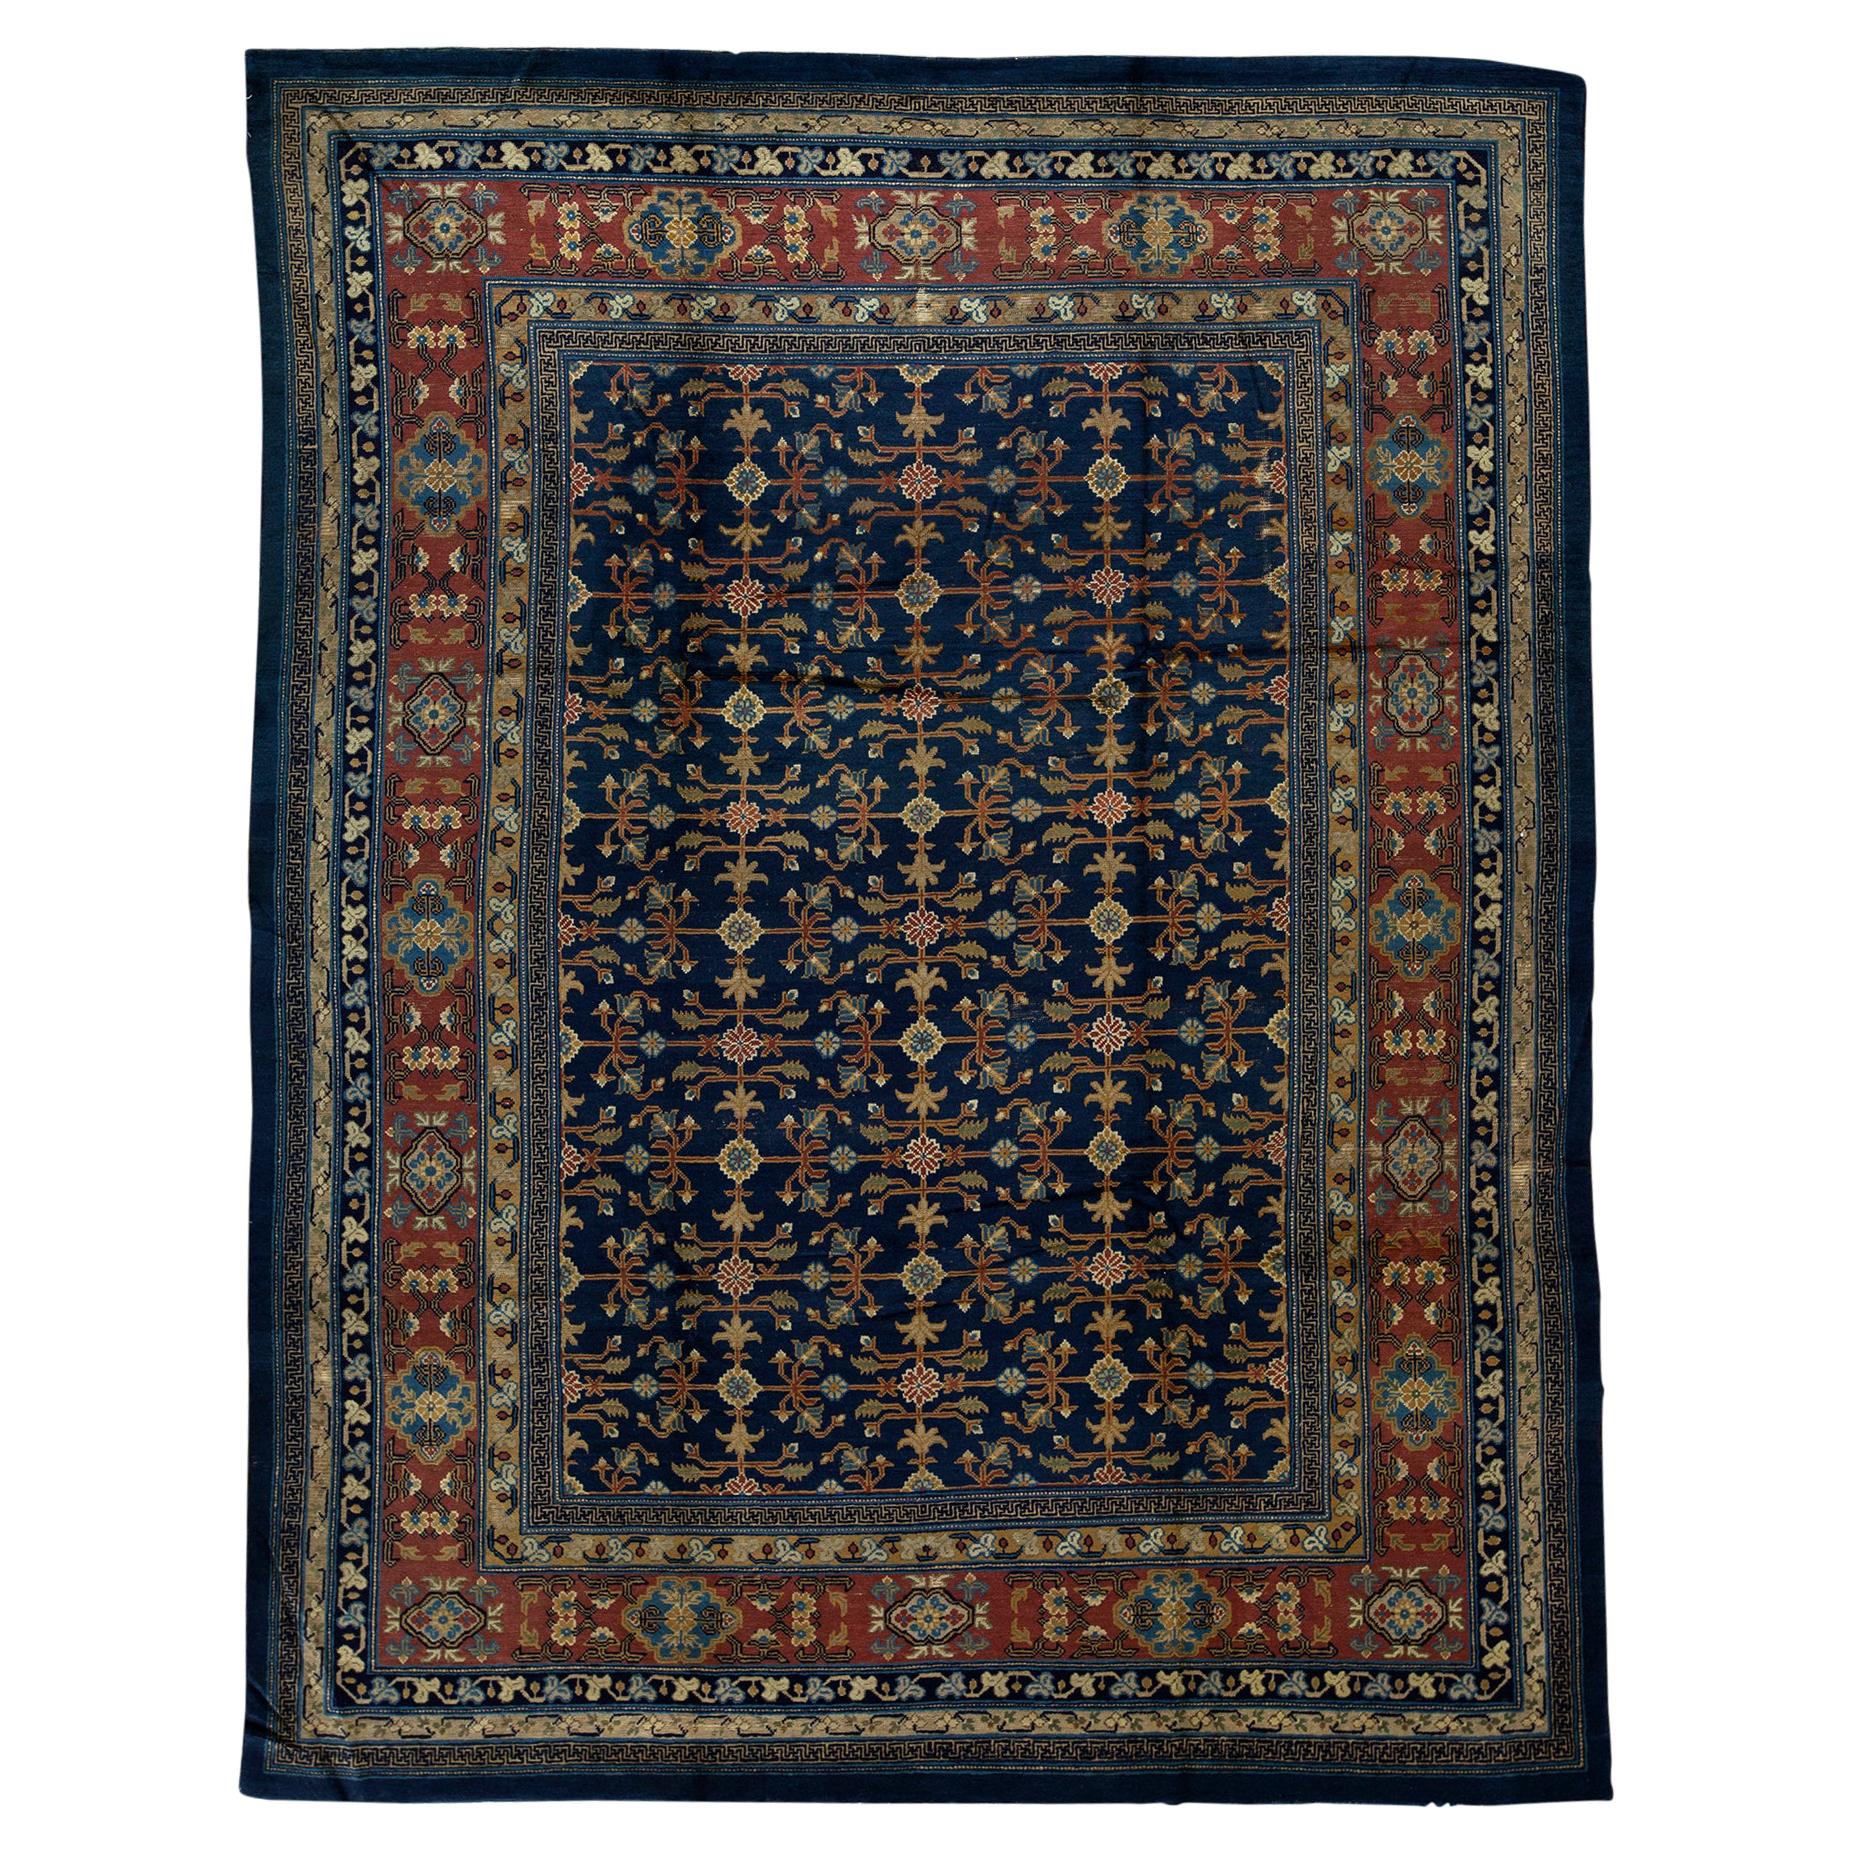  Traditional Handwoven Antique Samarkand Navy / Rust Area Rug 8'10"x11'6"